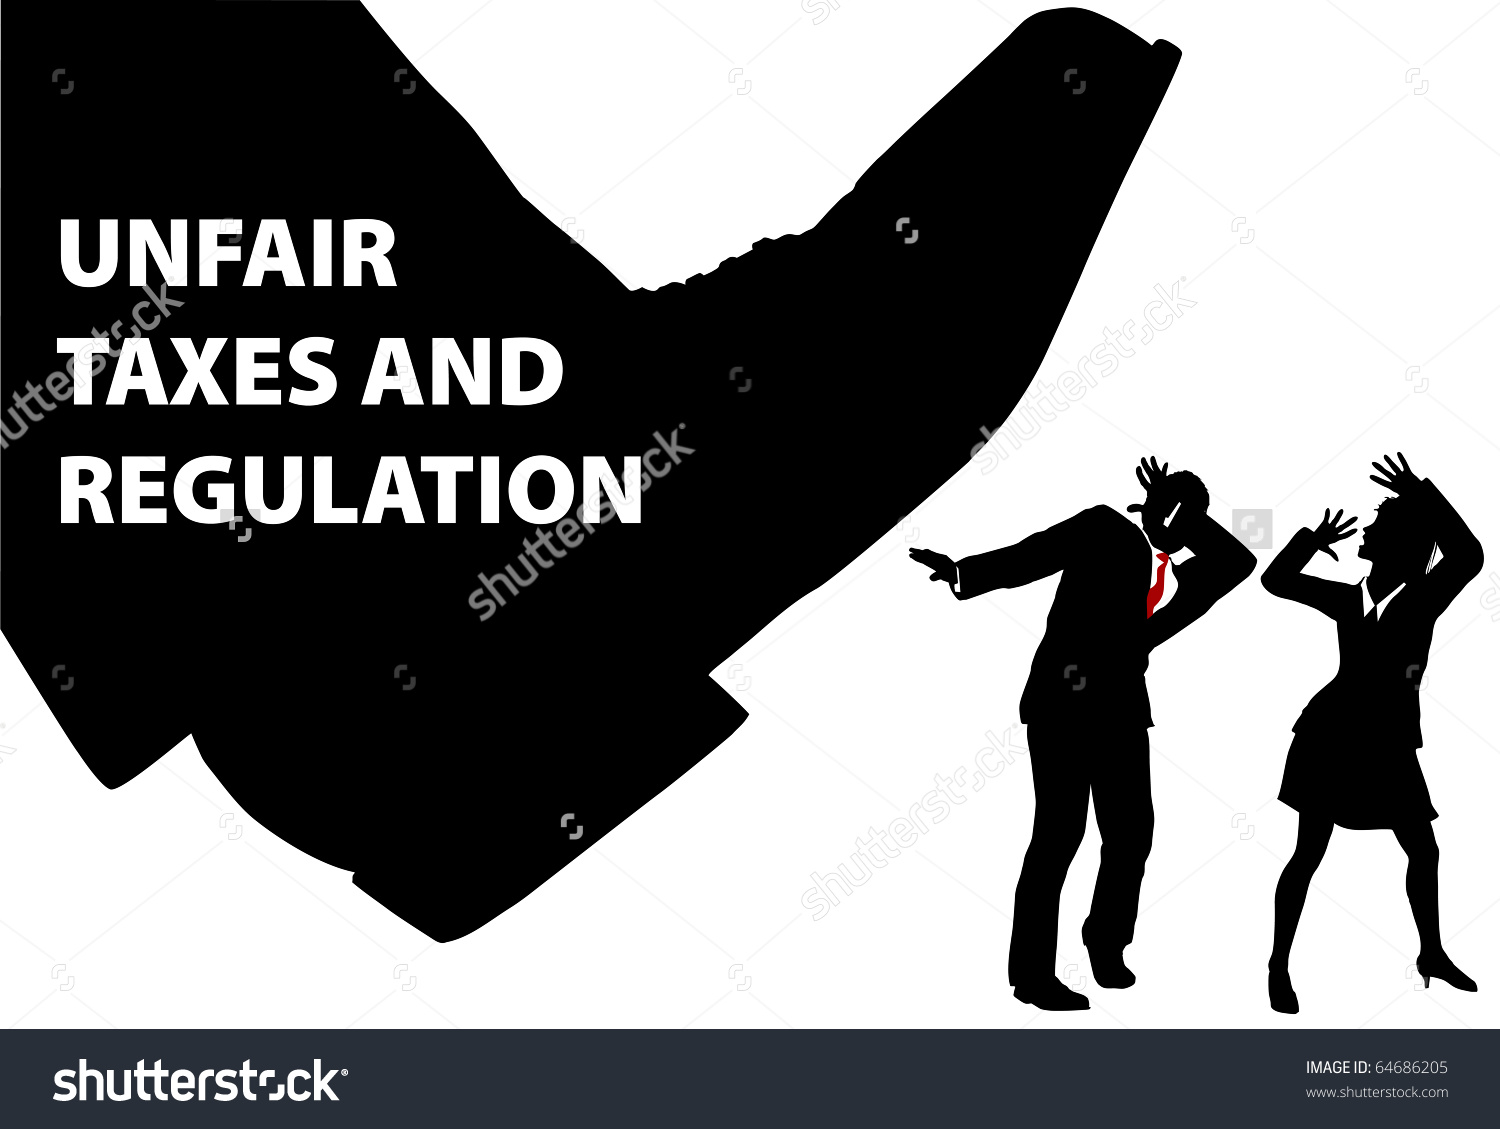 Image result for taxes are unfair